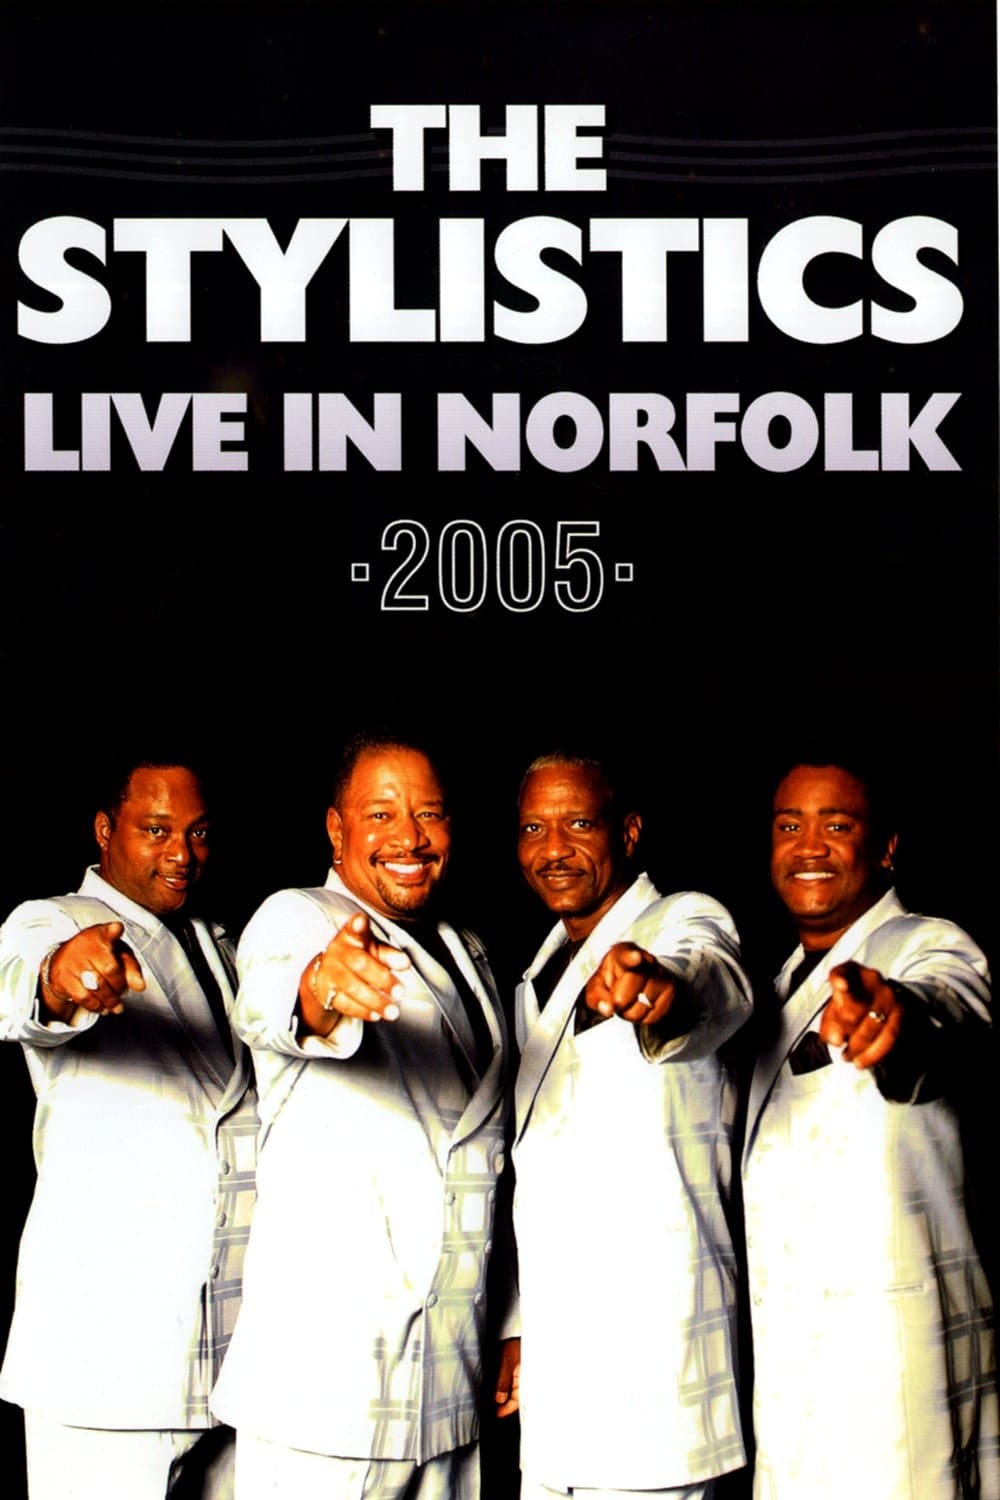 The Stylistics: Live in Norfolk 2005